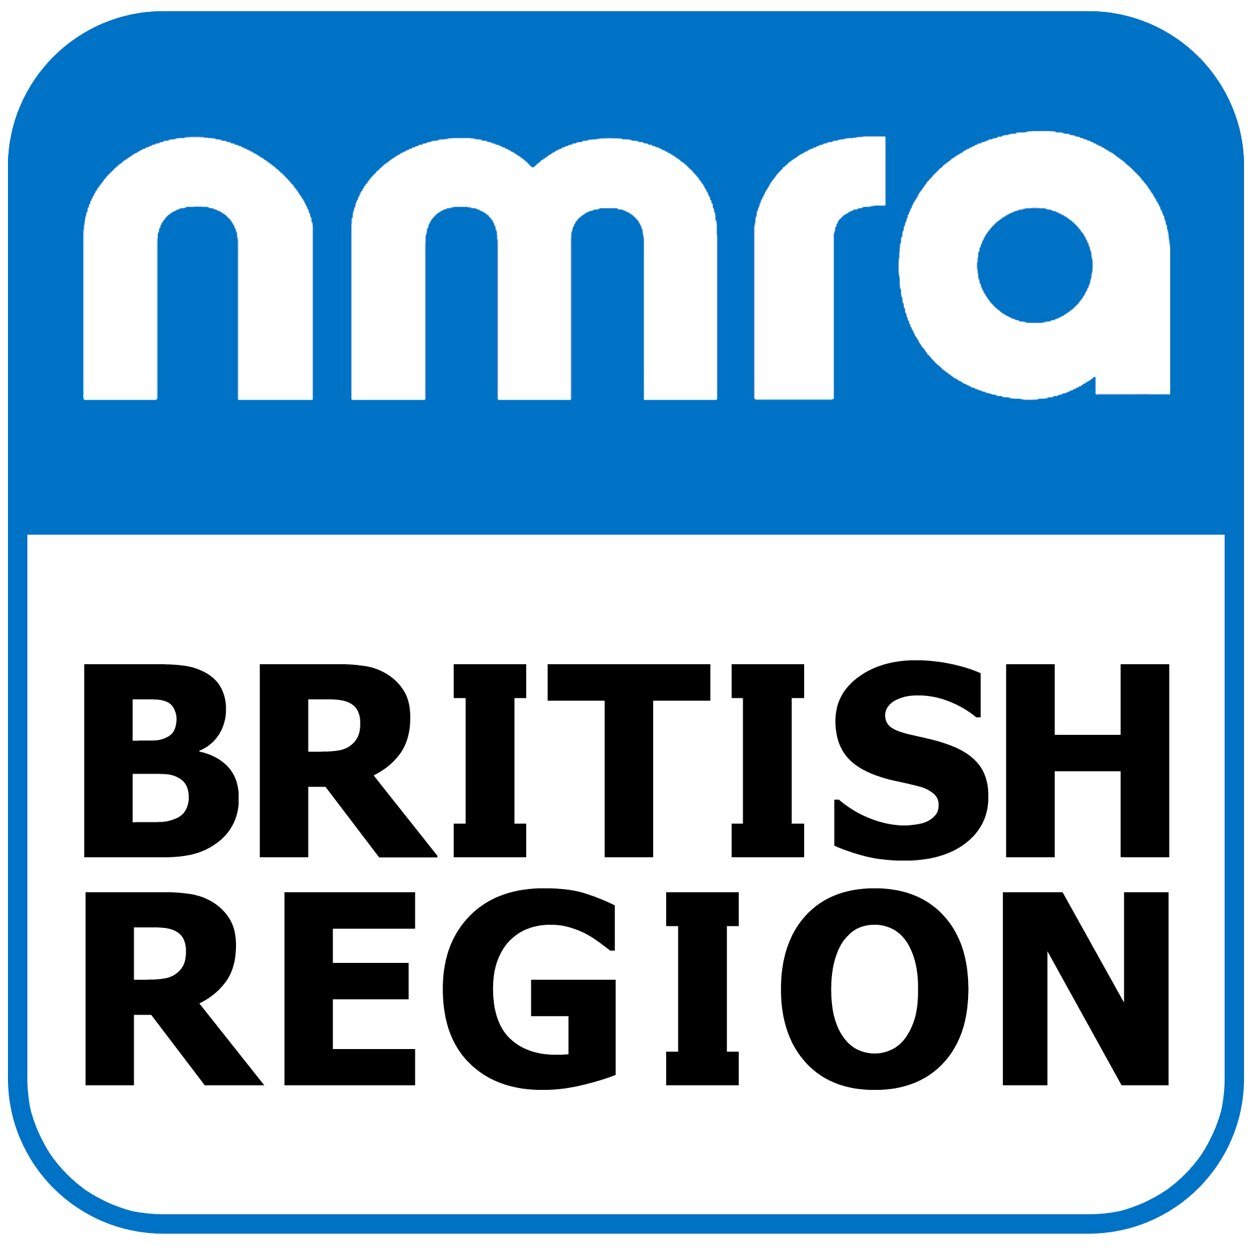 NMRA British Region sharing know-how to promote North American model railroading in the United Kingdom.